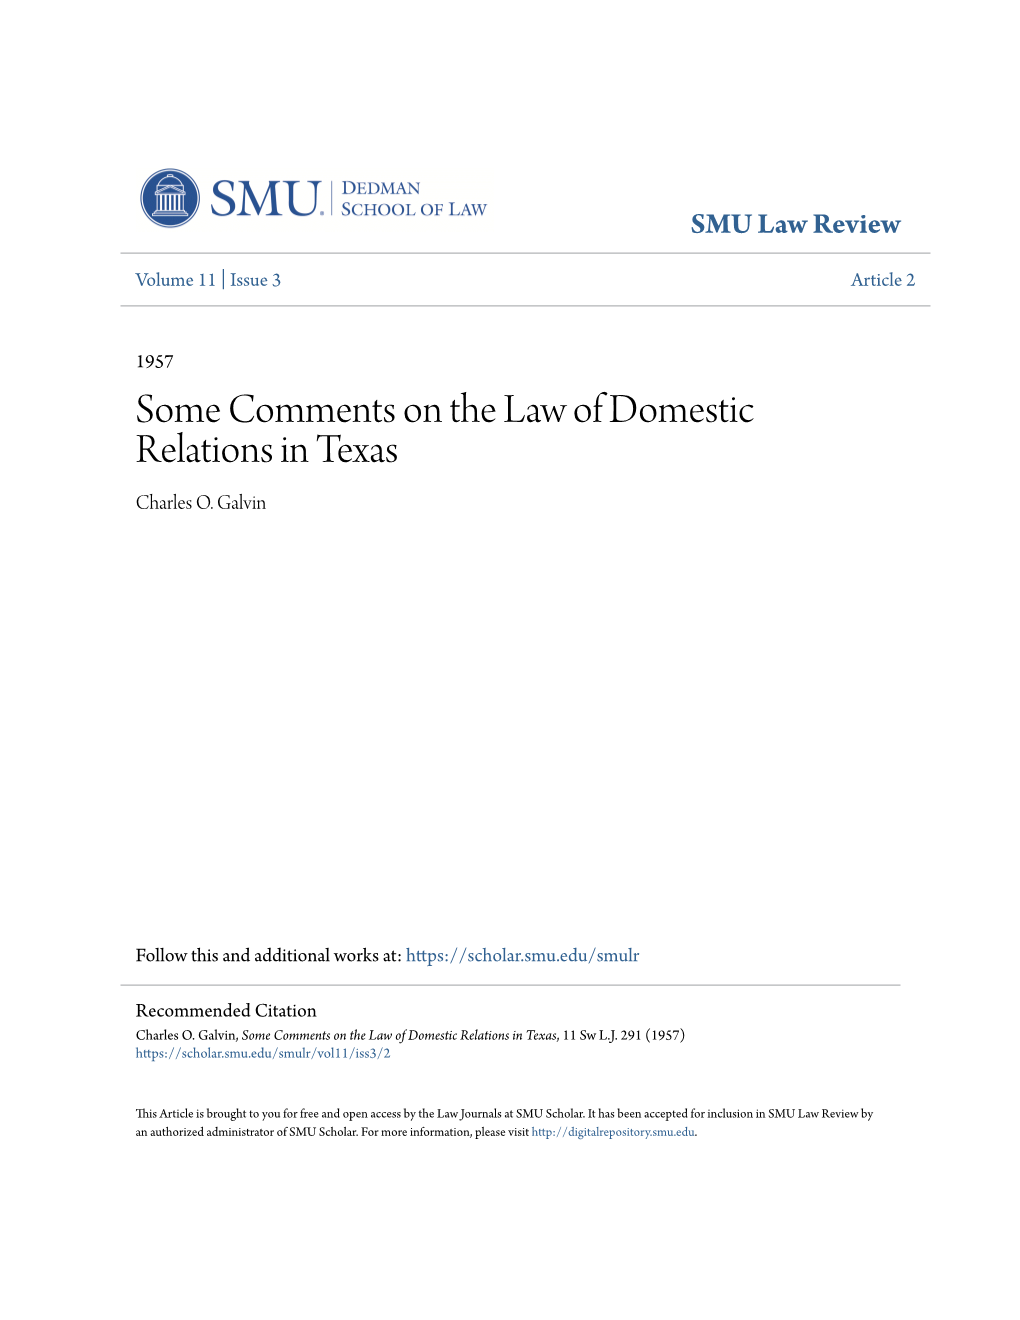 Some Comments on the Law of Domestic Relations in Texas Charles O